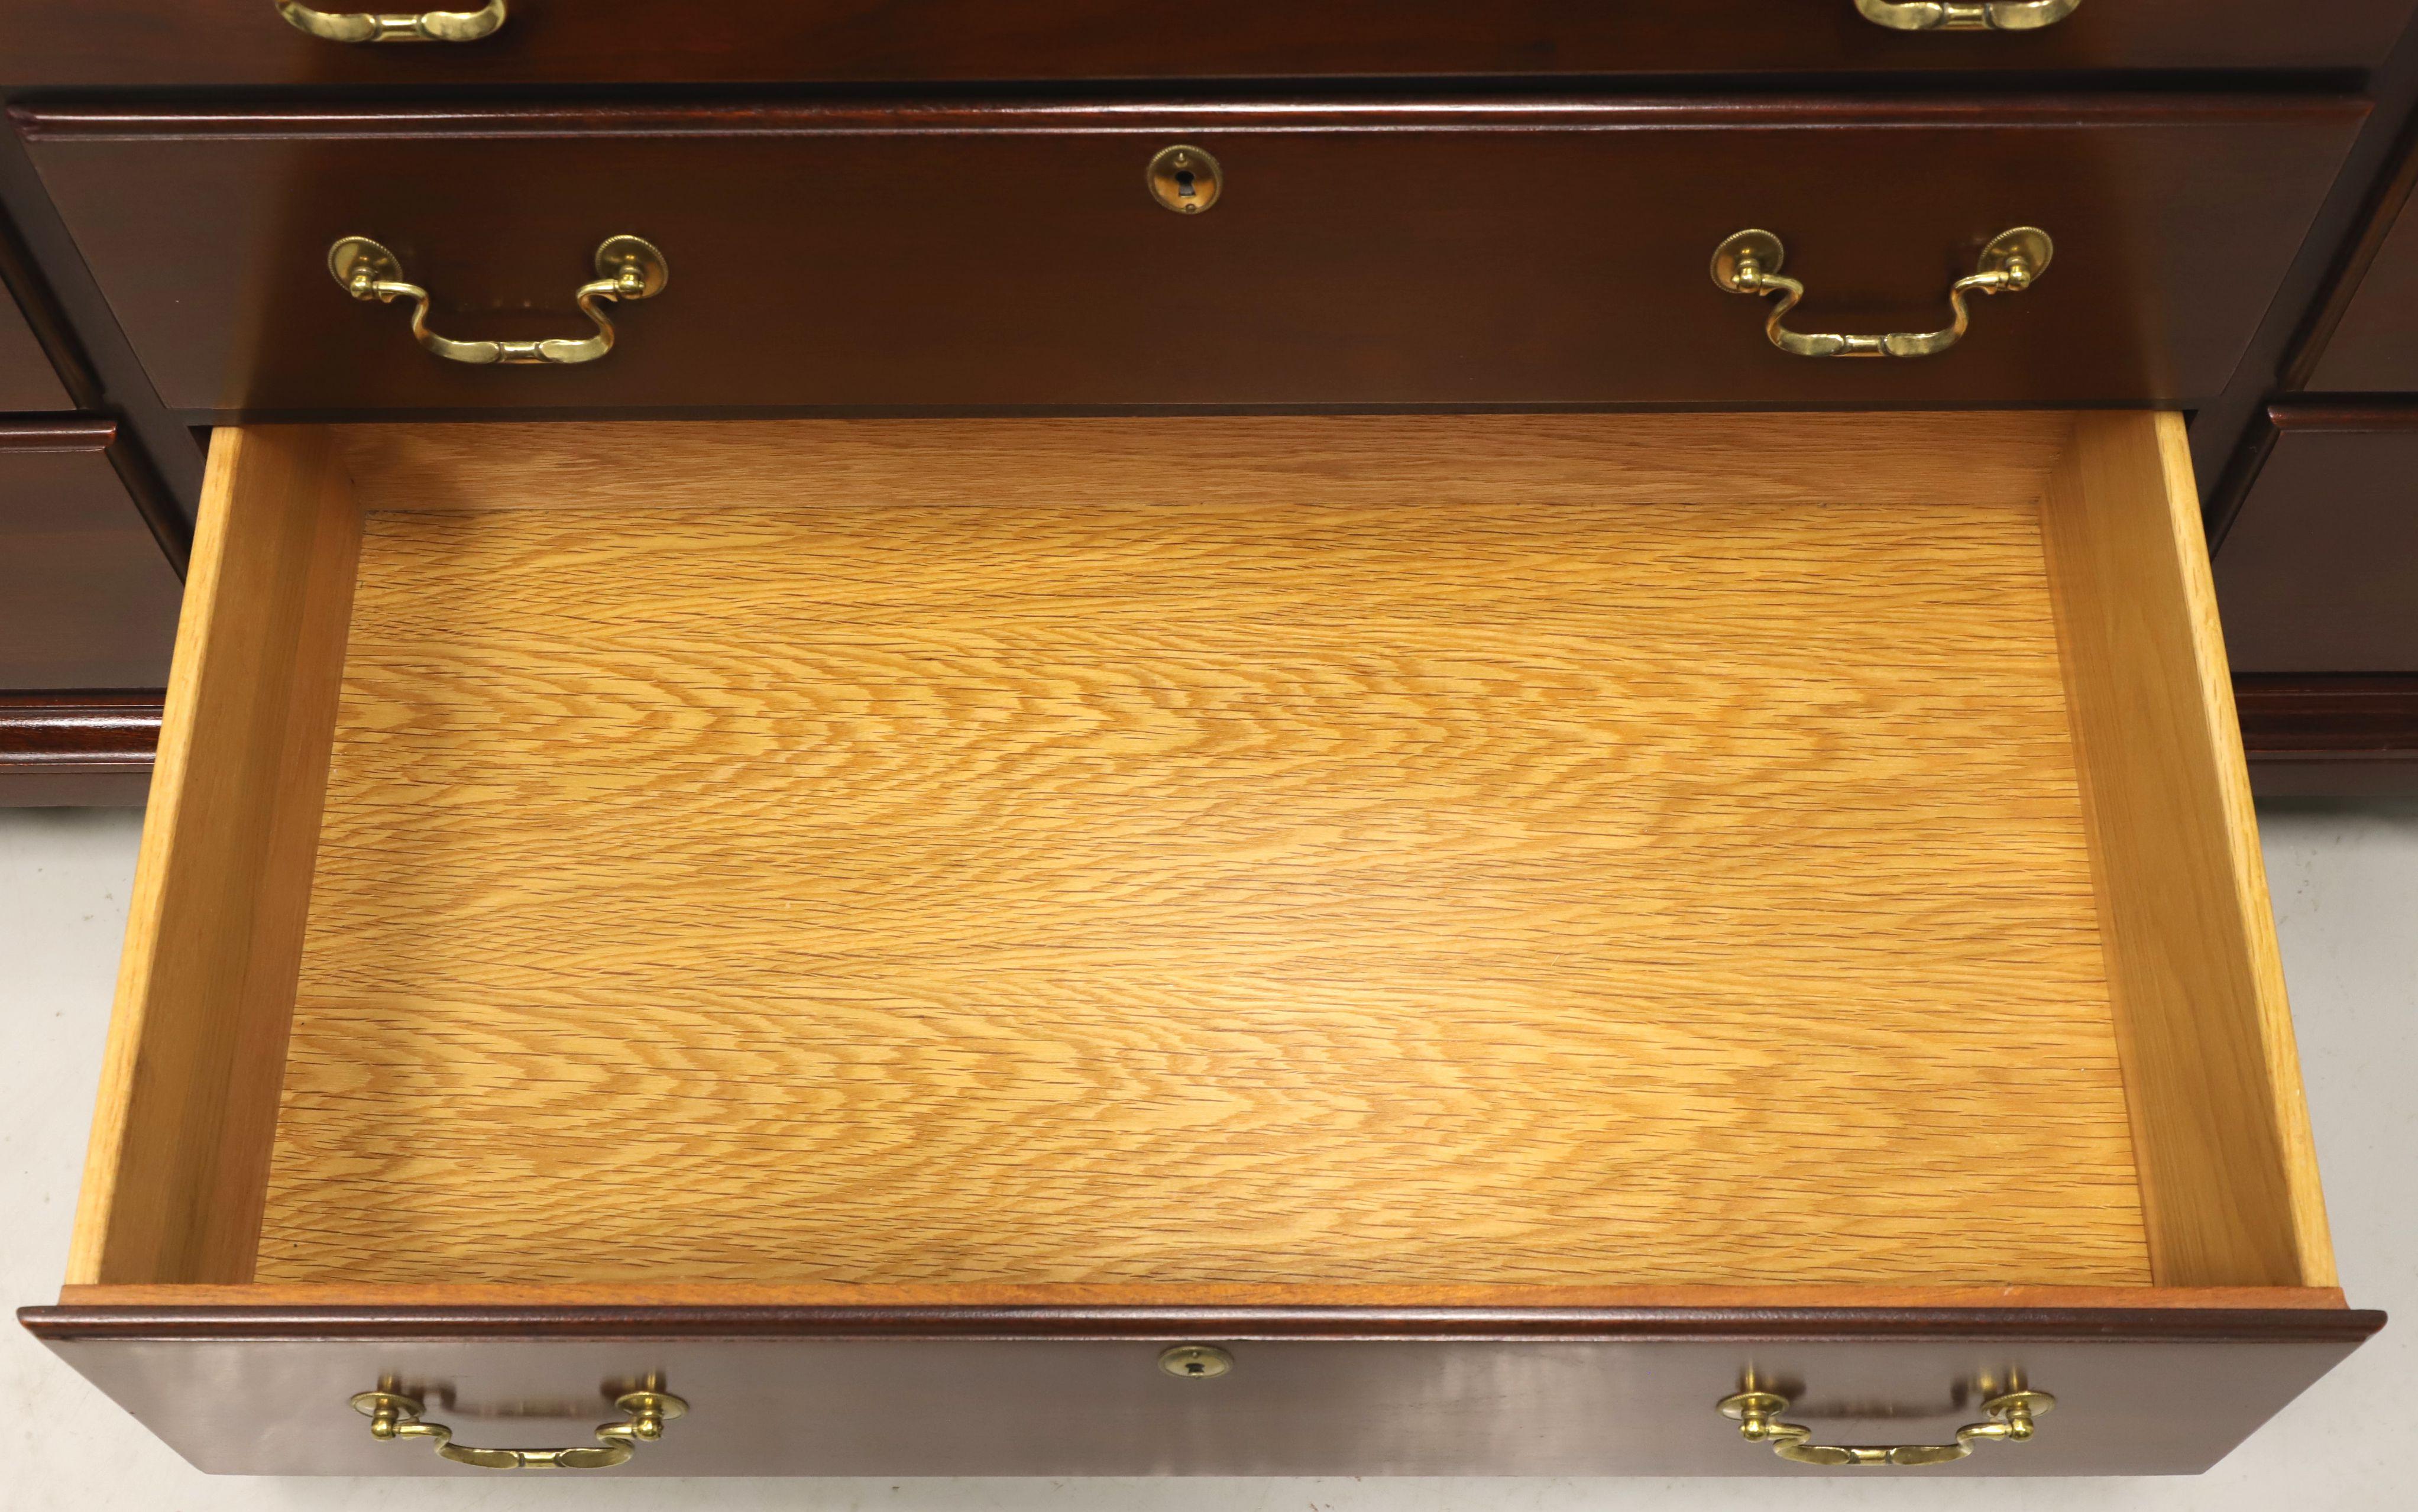 Brass LINK-TAYLOR Heirloom Beaufort Solid Mahogany Chippendale Triple Dresser - A For Sale